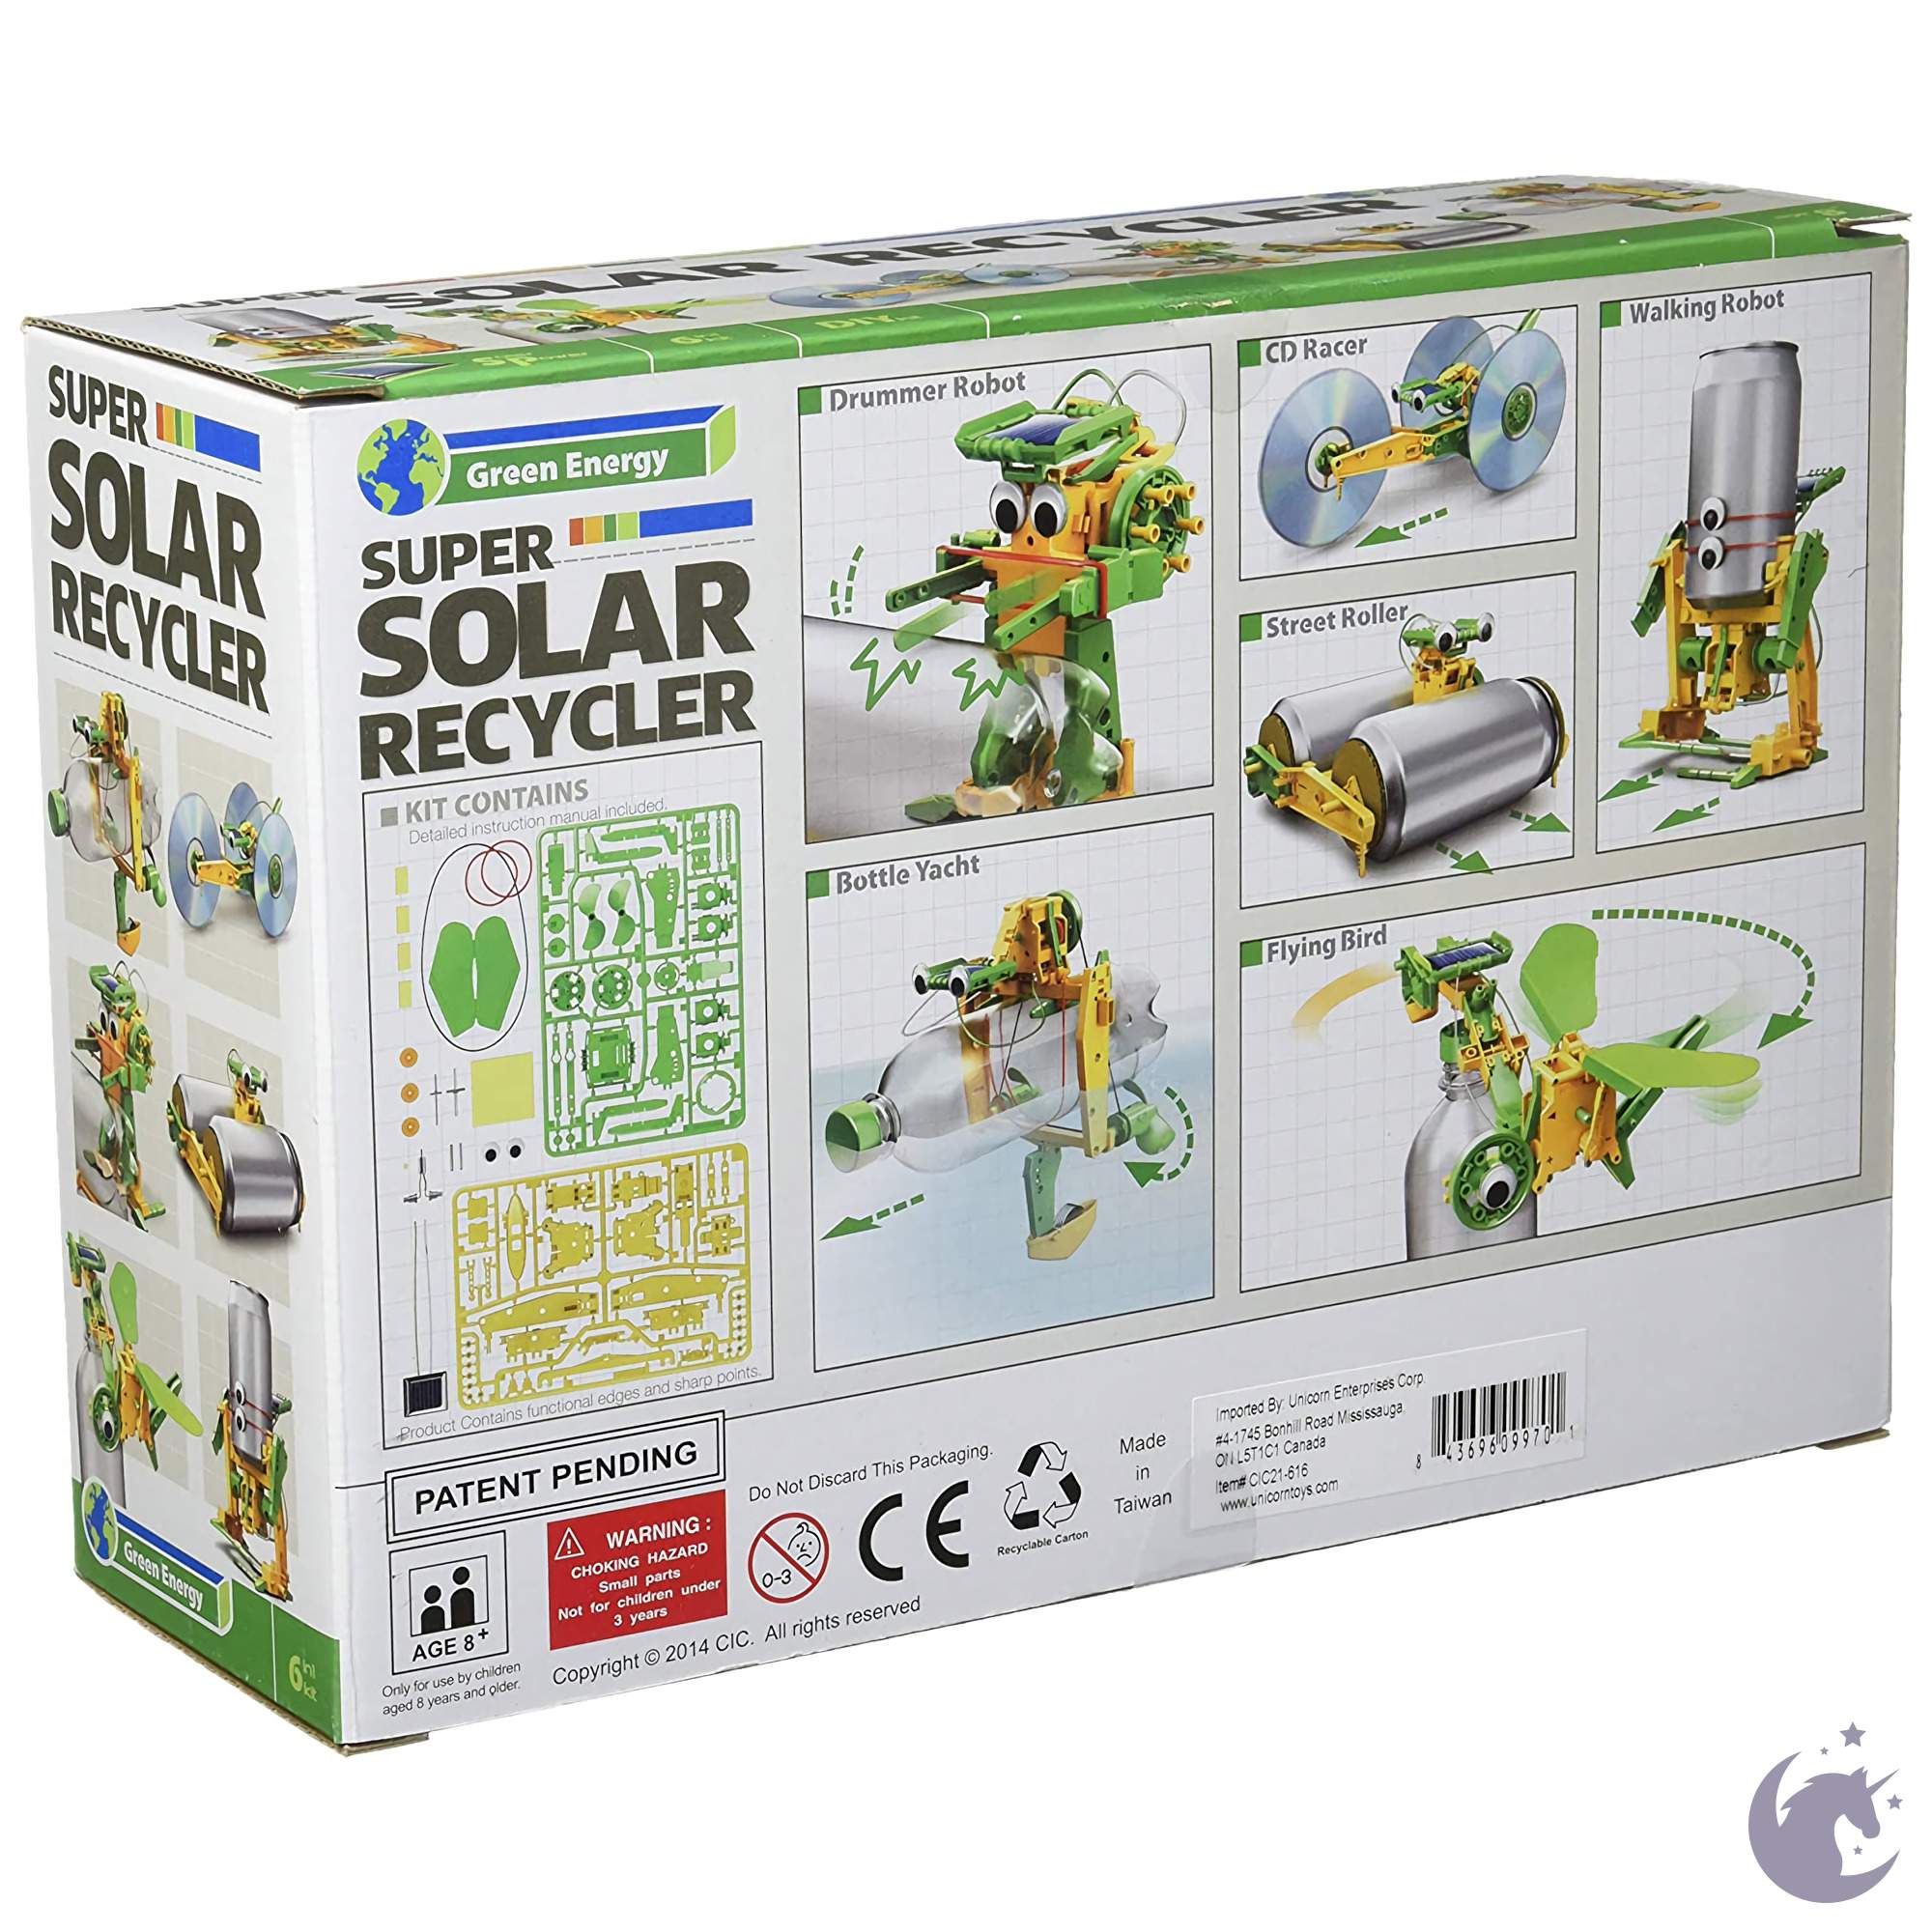 unicorntoys cic kits 6 in 1 super solar recycler educational robot kit engineering stem toys for kids CIC21-616